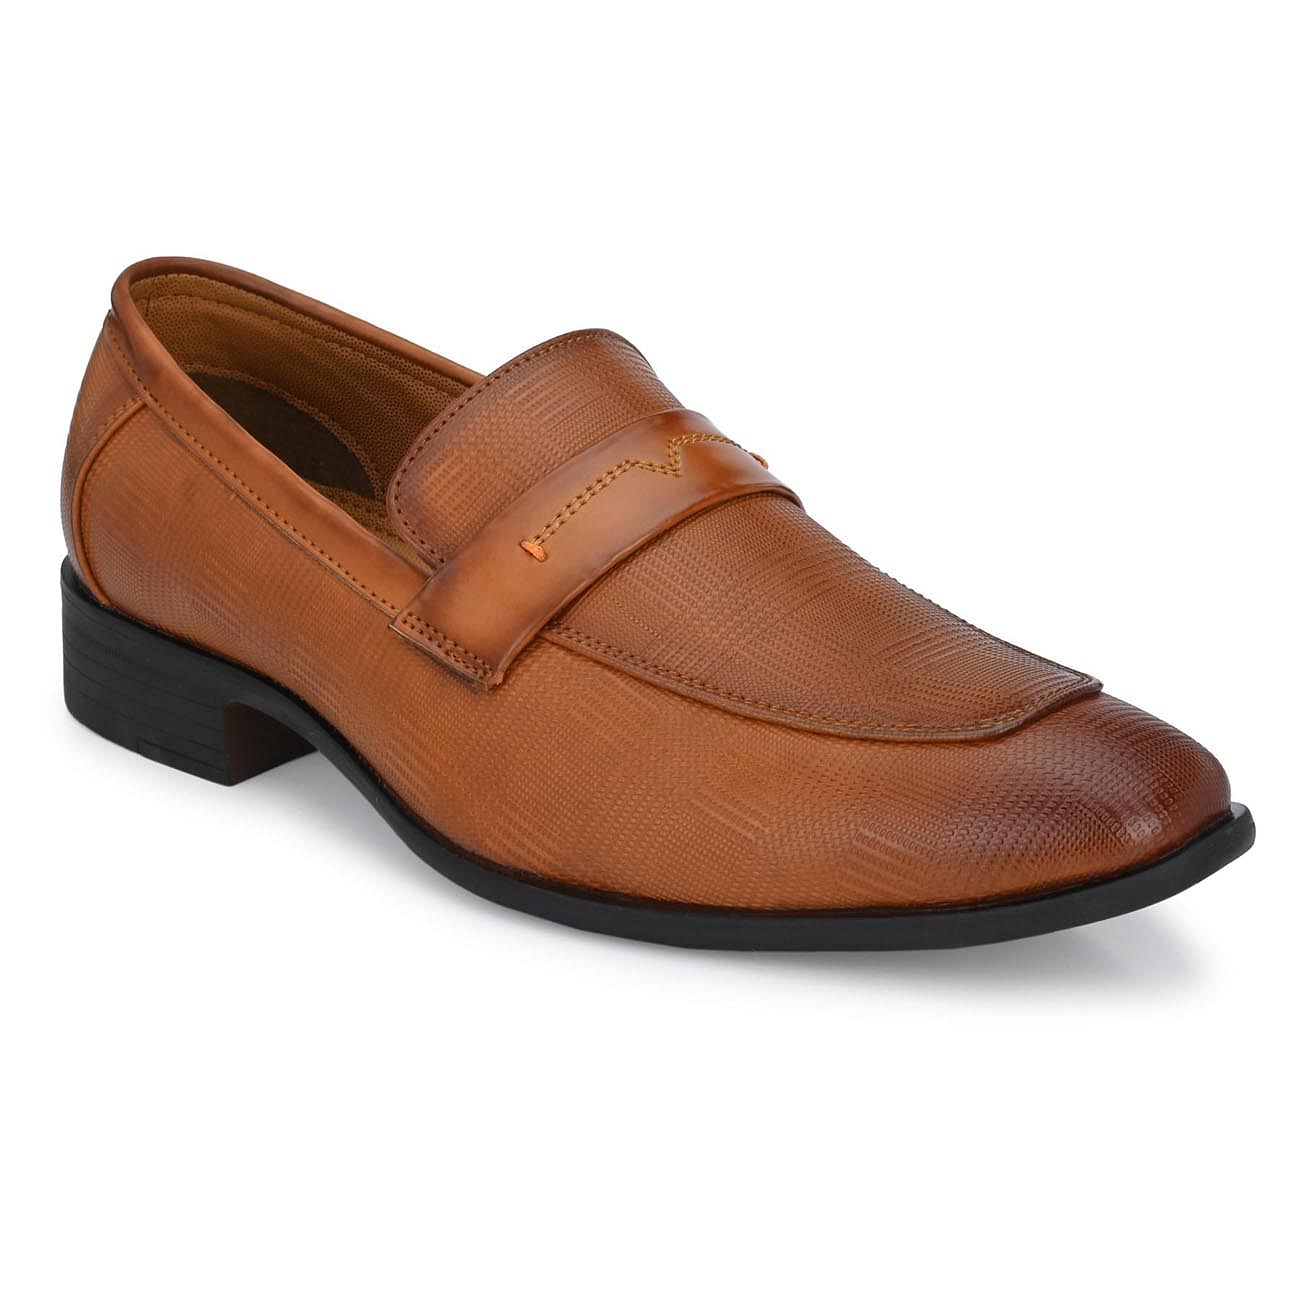 Pair-it Men's Formal penny Loafer Shoes - Tan- LZ-T-FORMAL109